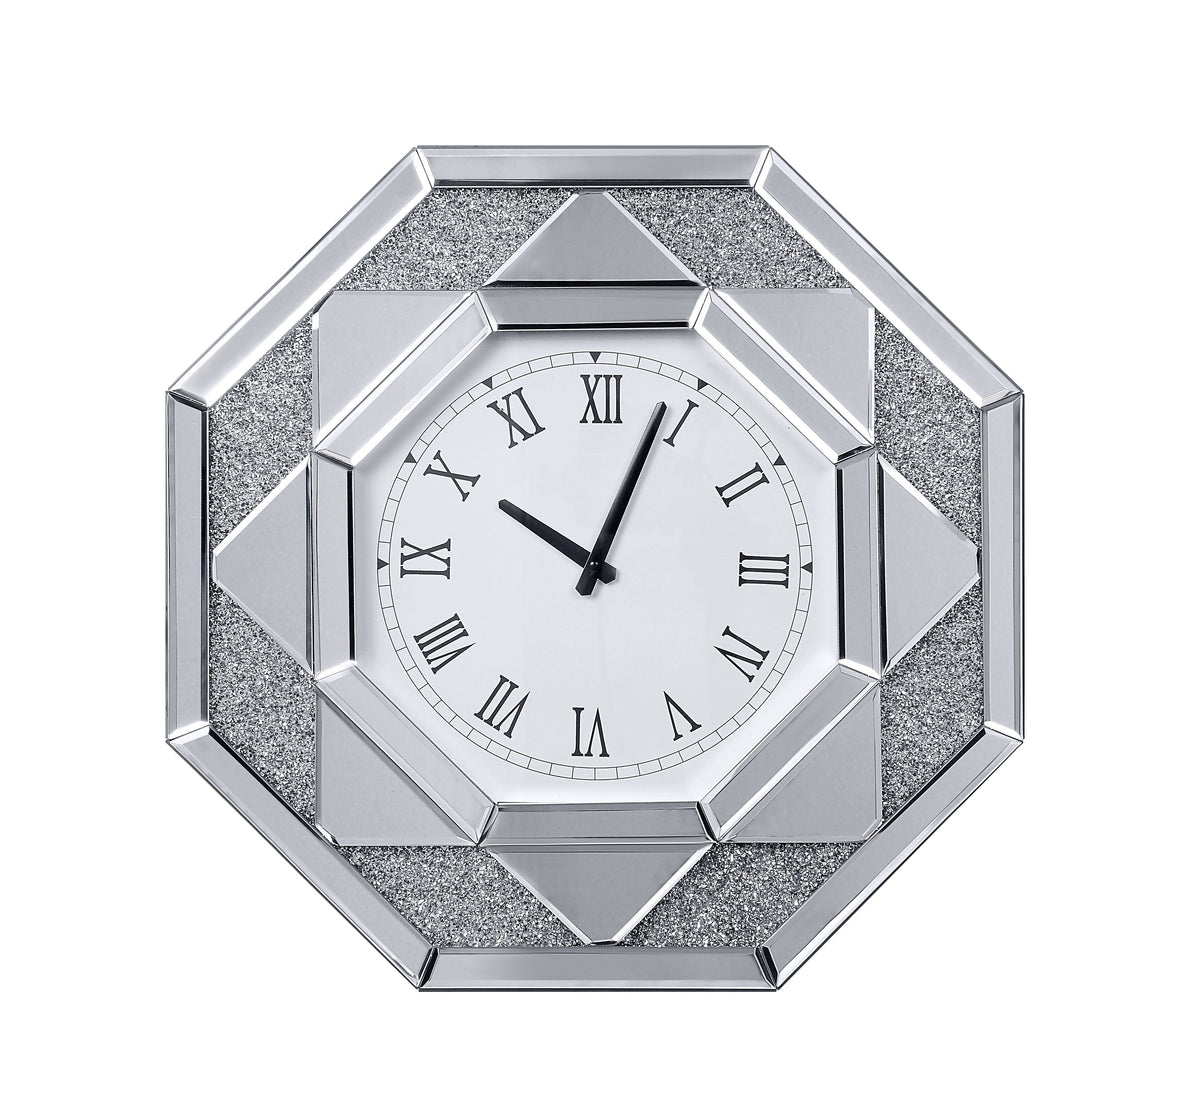 Octagonal Shaped Mirrored Frame Wall Clock with Faux Crystal Inlay, Silver - BM196013